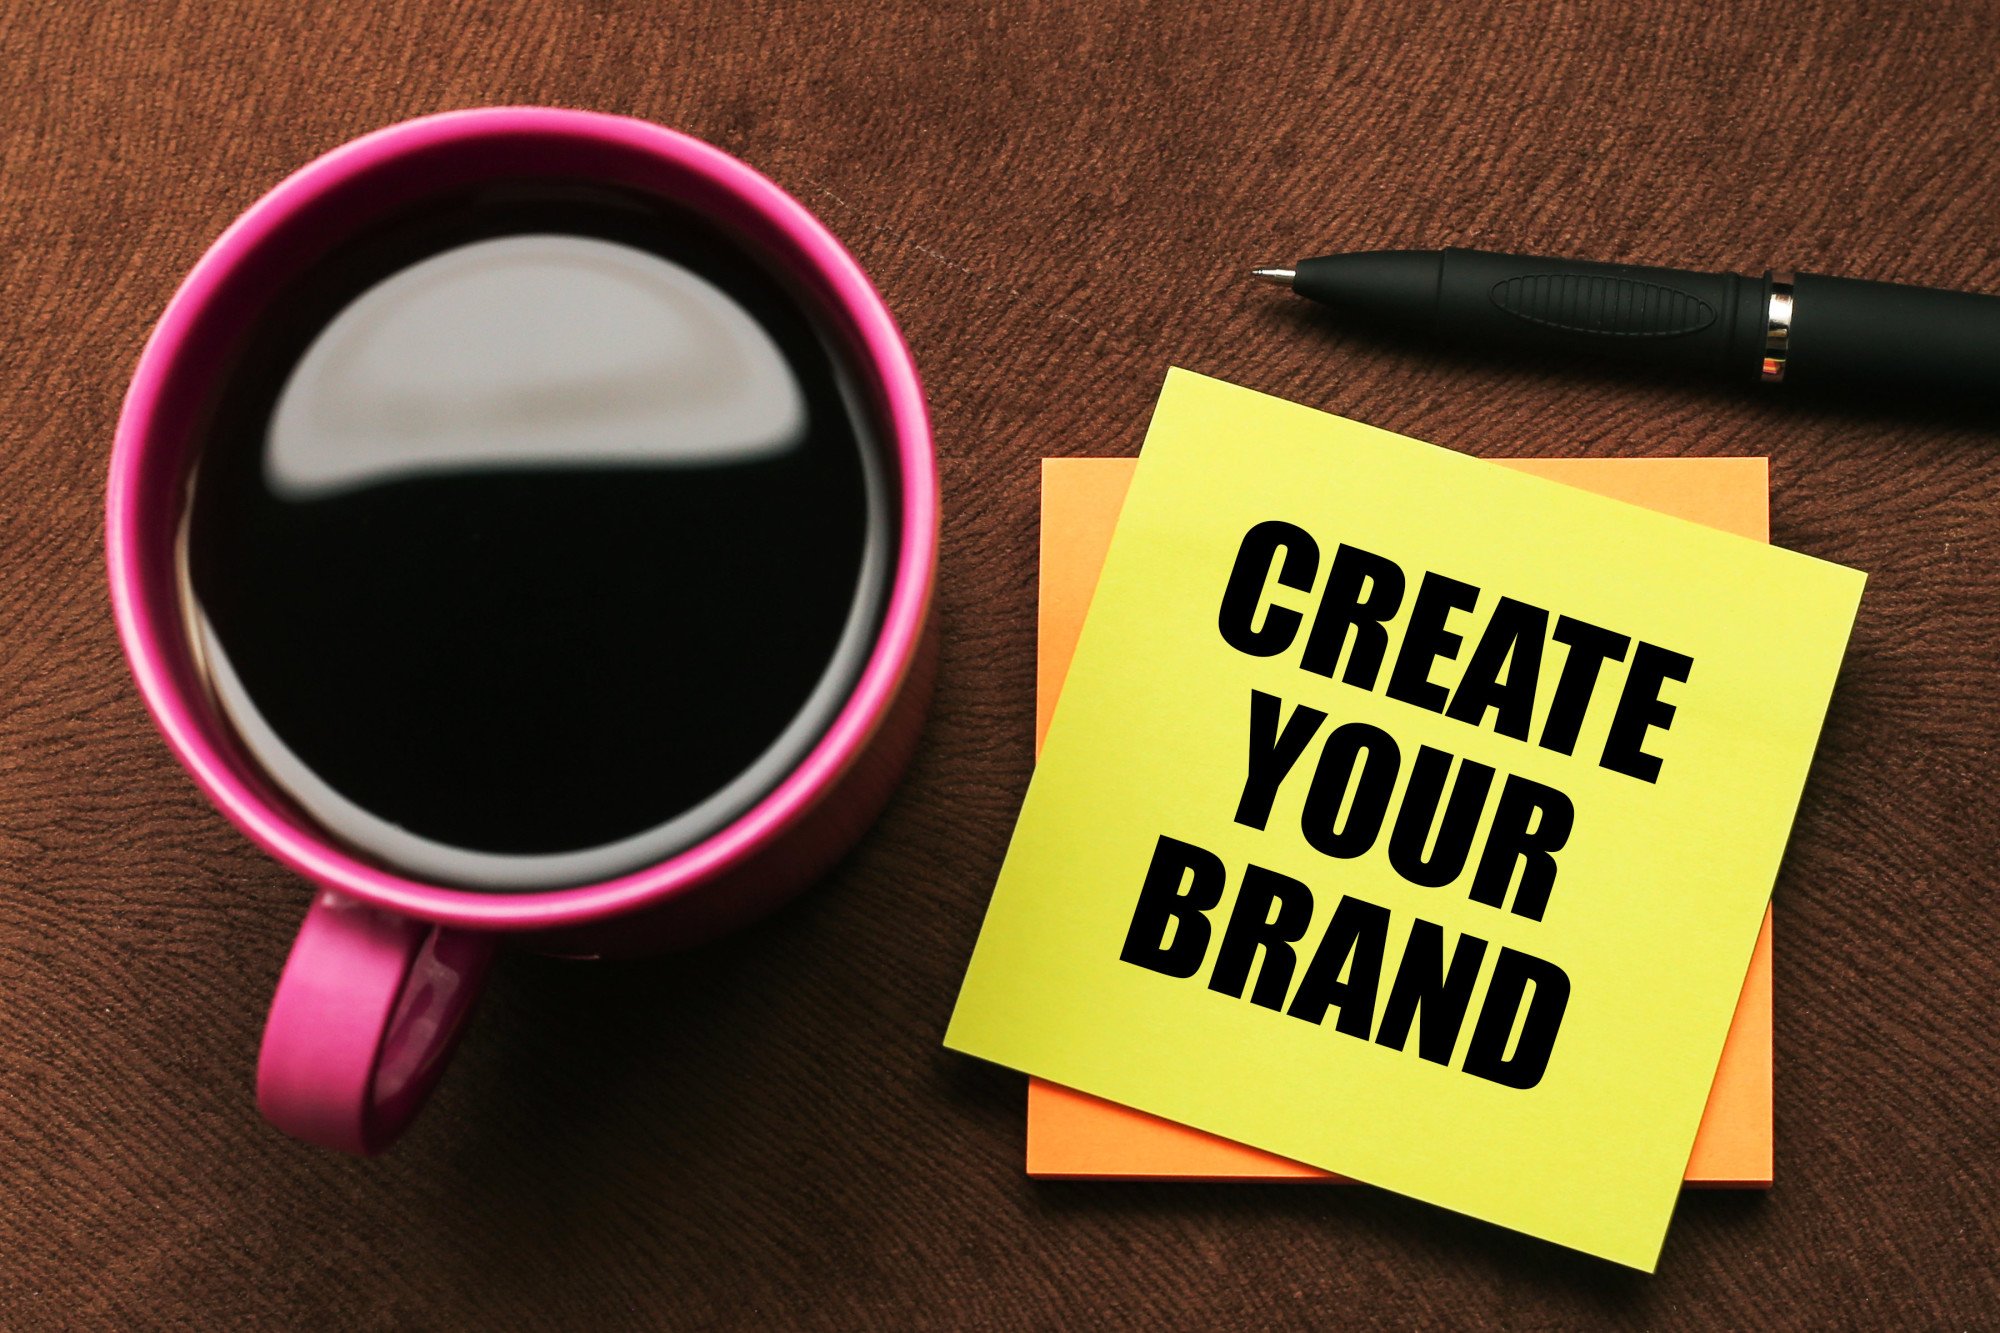 Create your brand